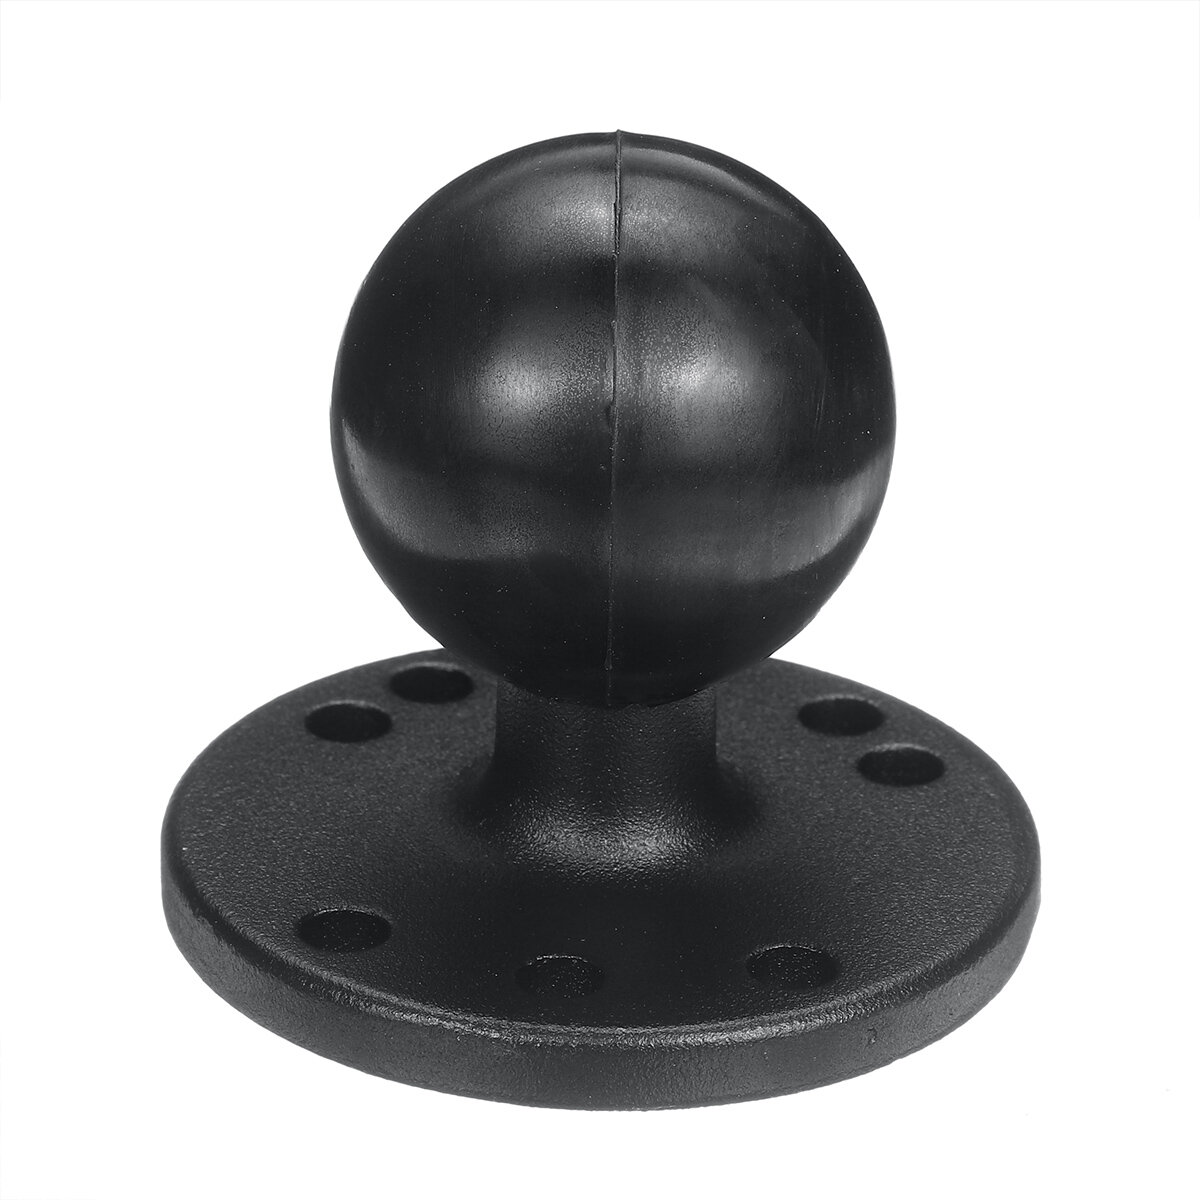 Mounts 2.5 inch round base with amps hole pattern & 1.5 inch ball for ship computer gps navigator bracket fixed ball head